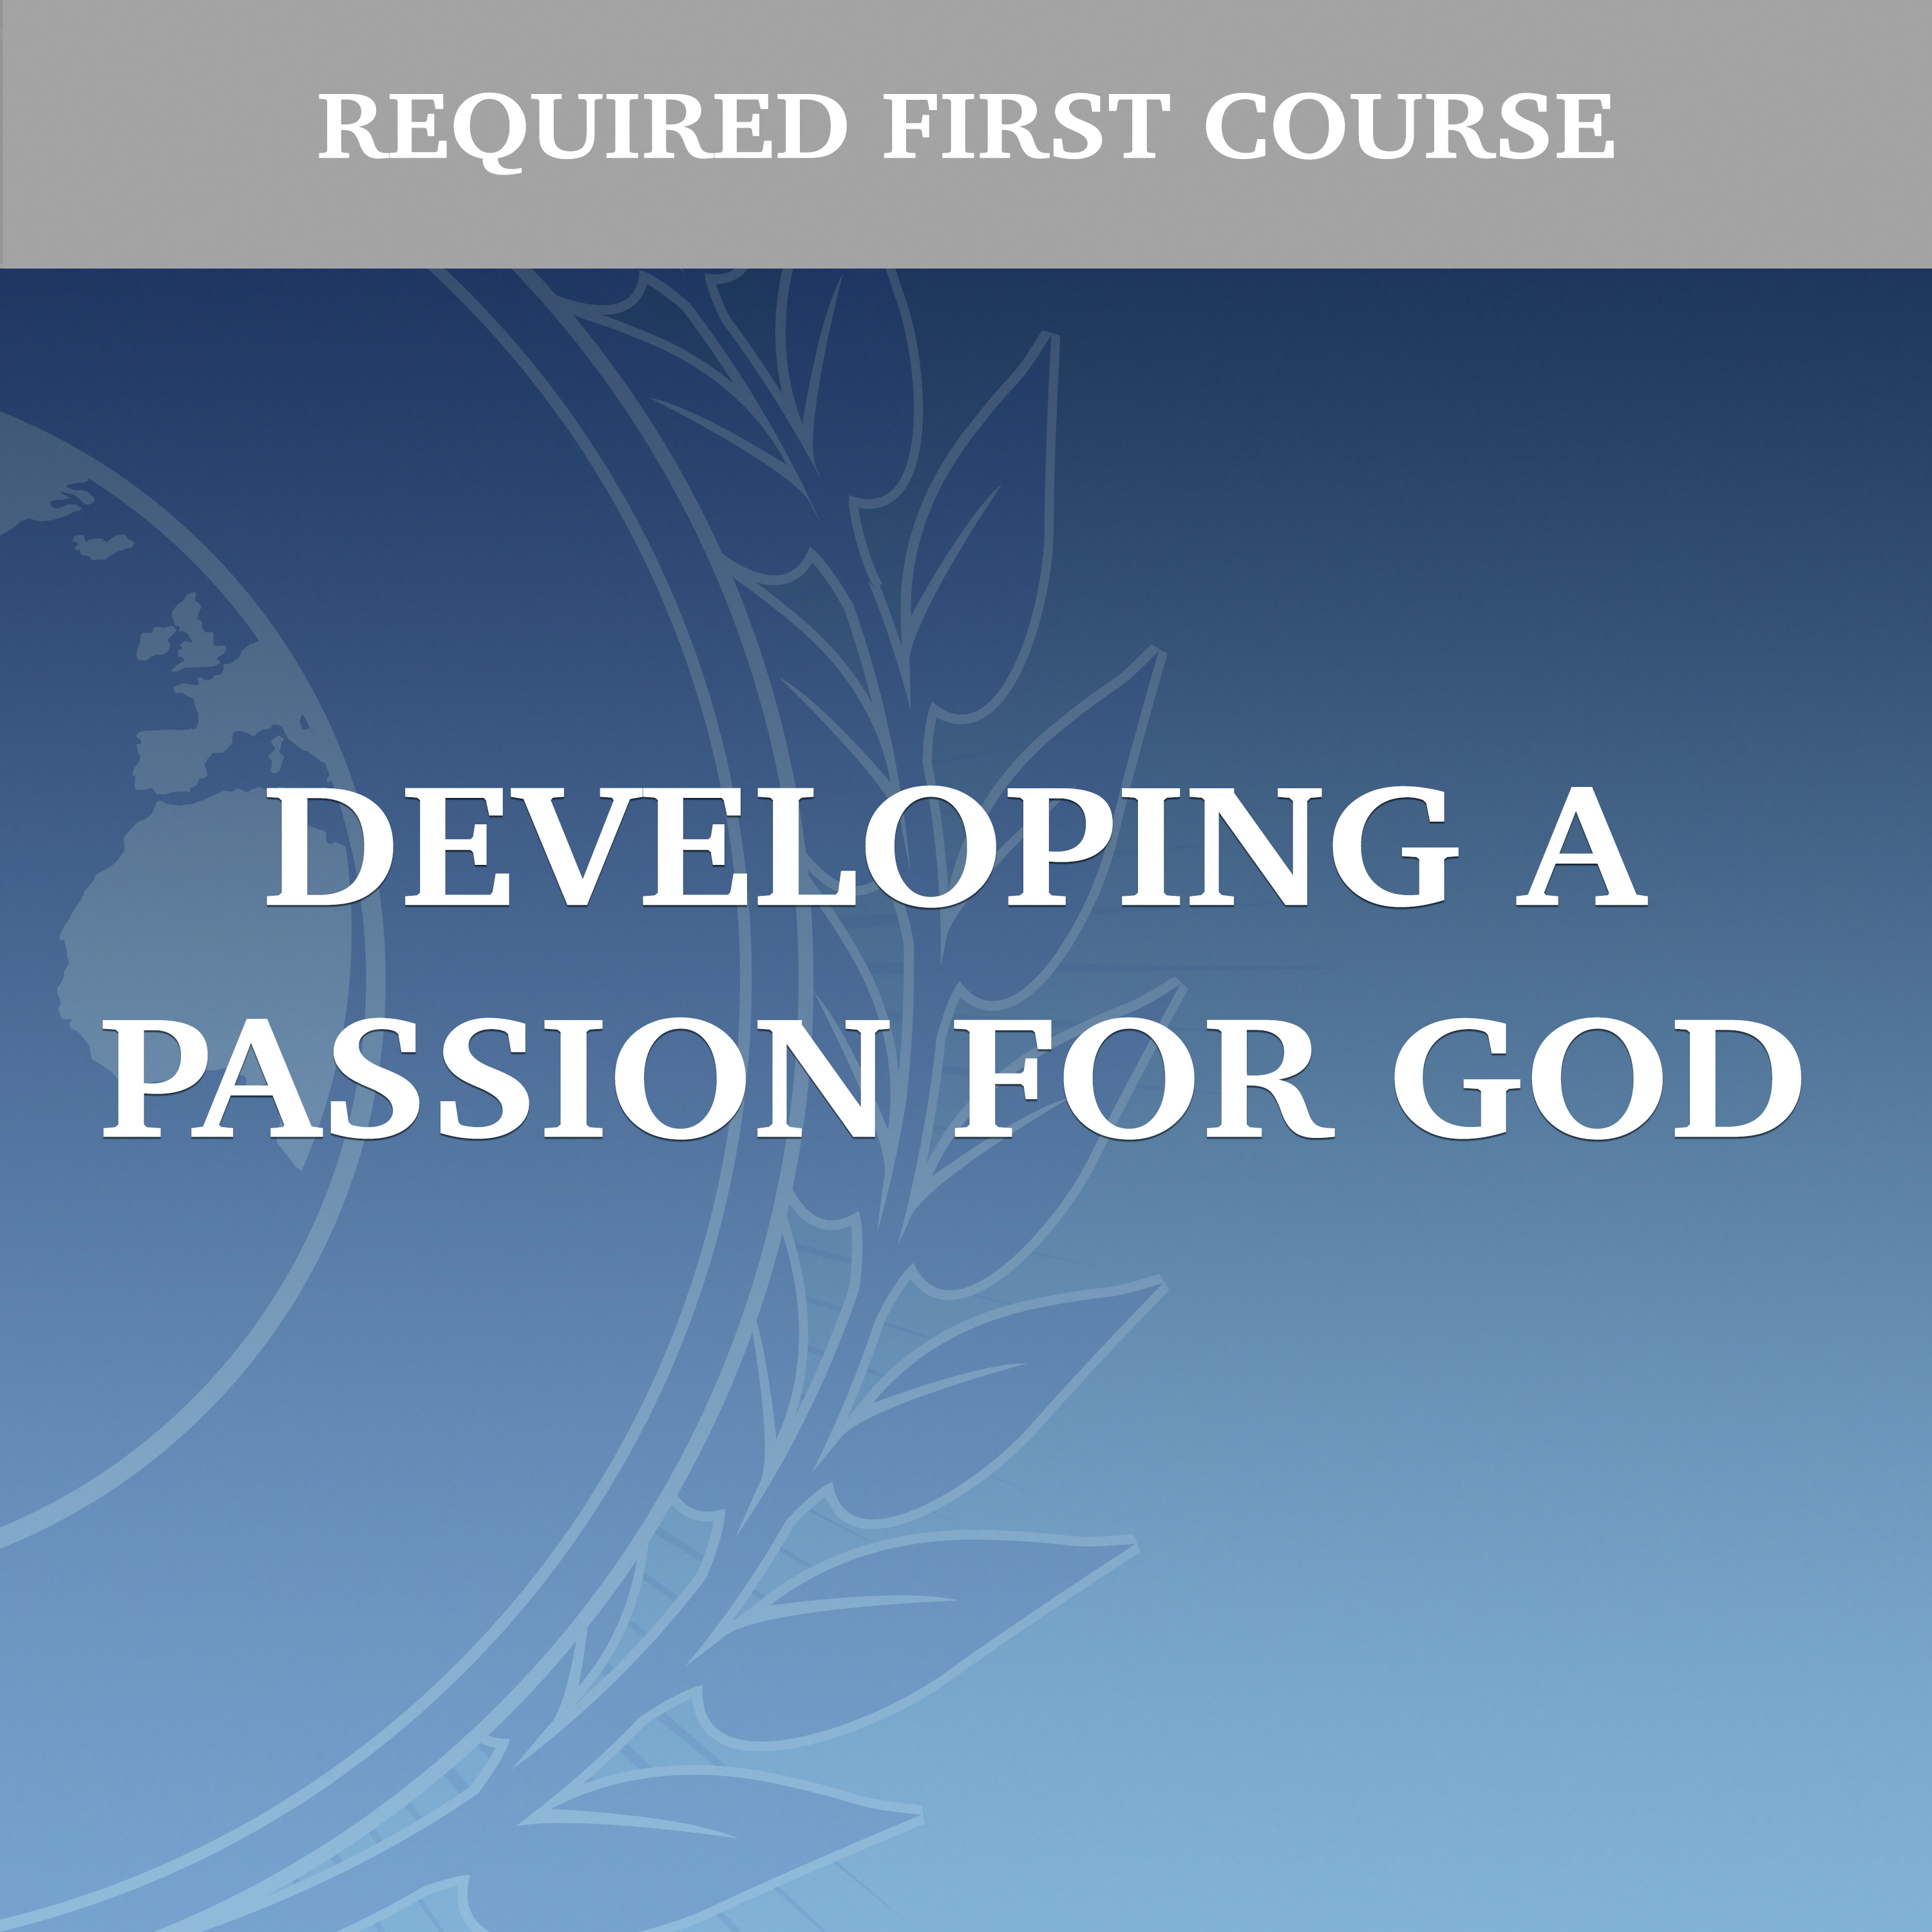 Featured image for “Developing a Passion for God”